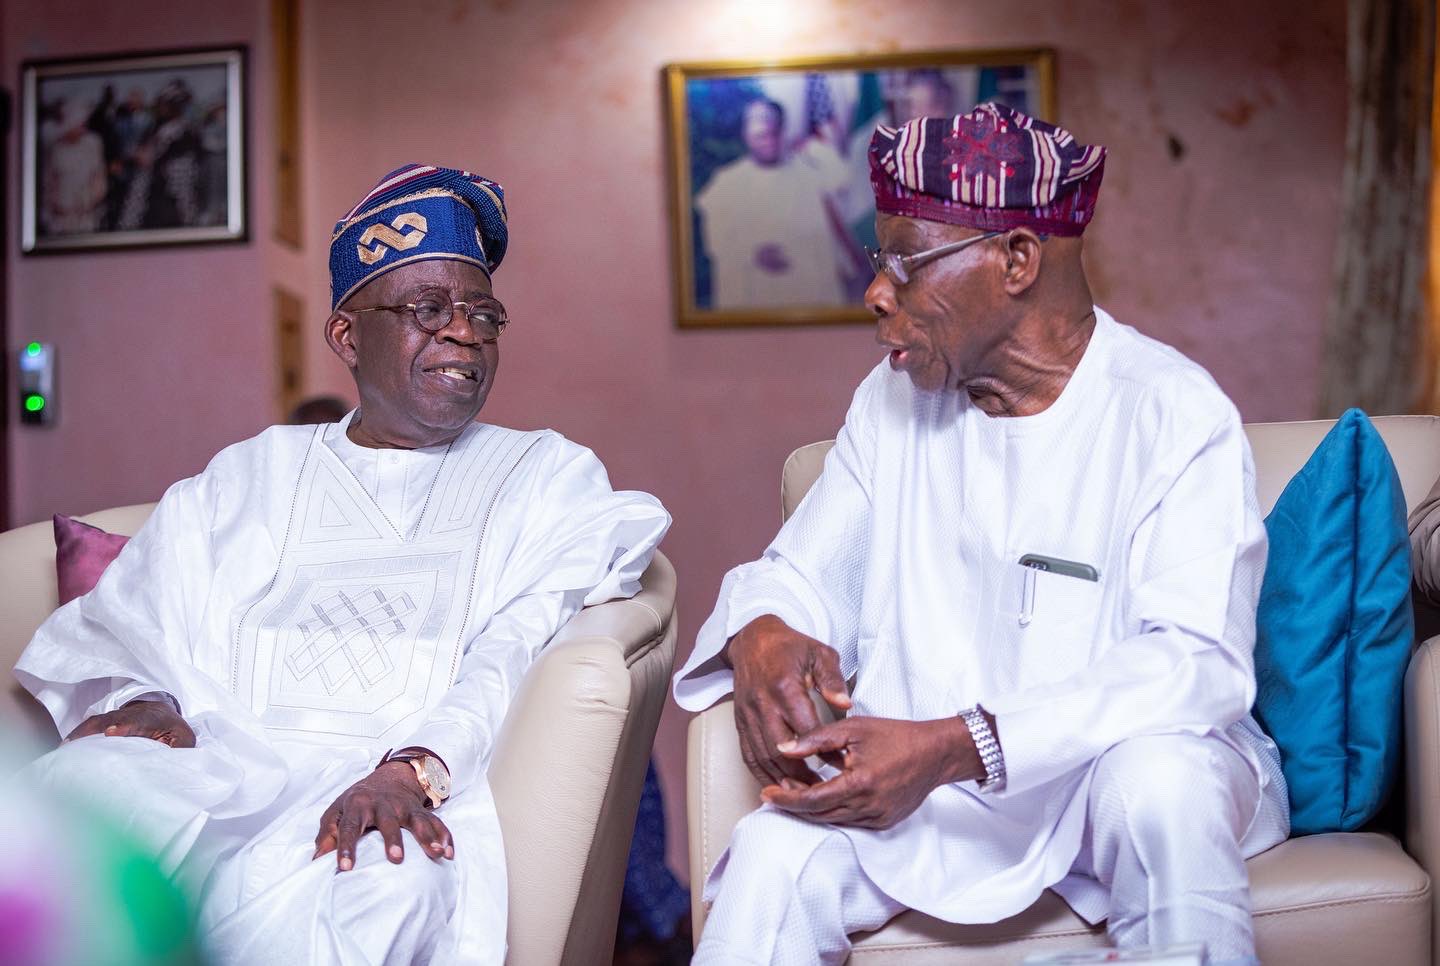 'You Are Not An Engineer' - Presidency Replies Obasanjo Over Comment On Nigeria's Refineries